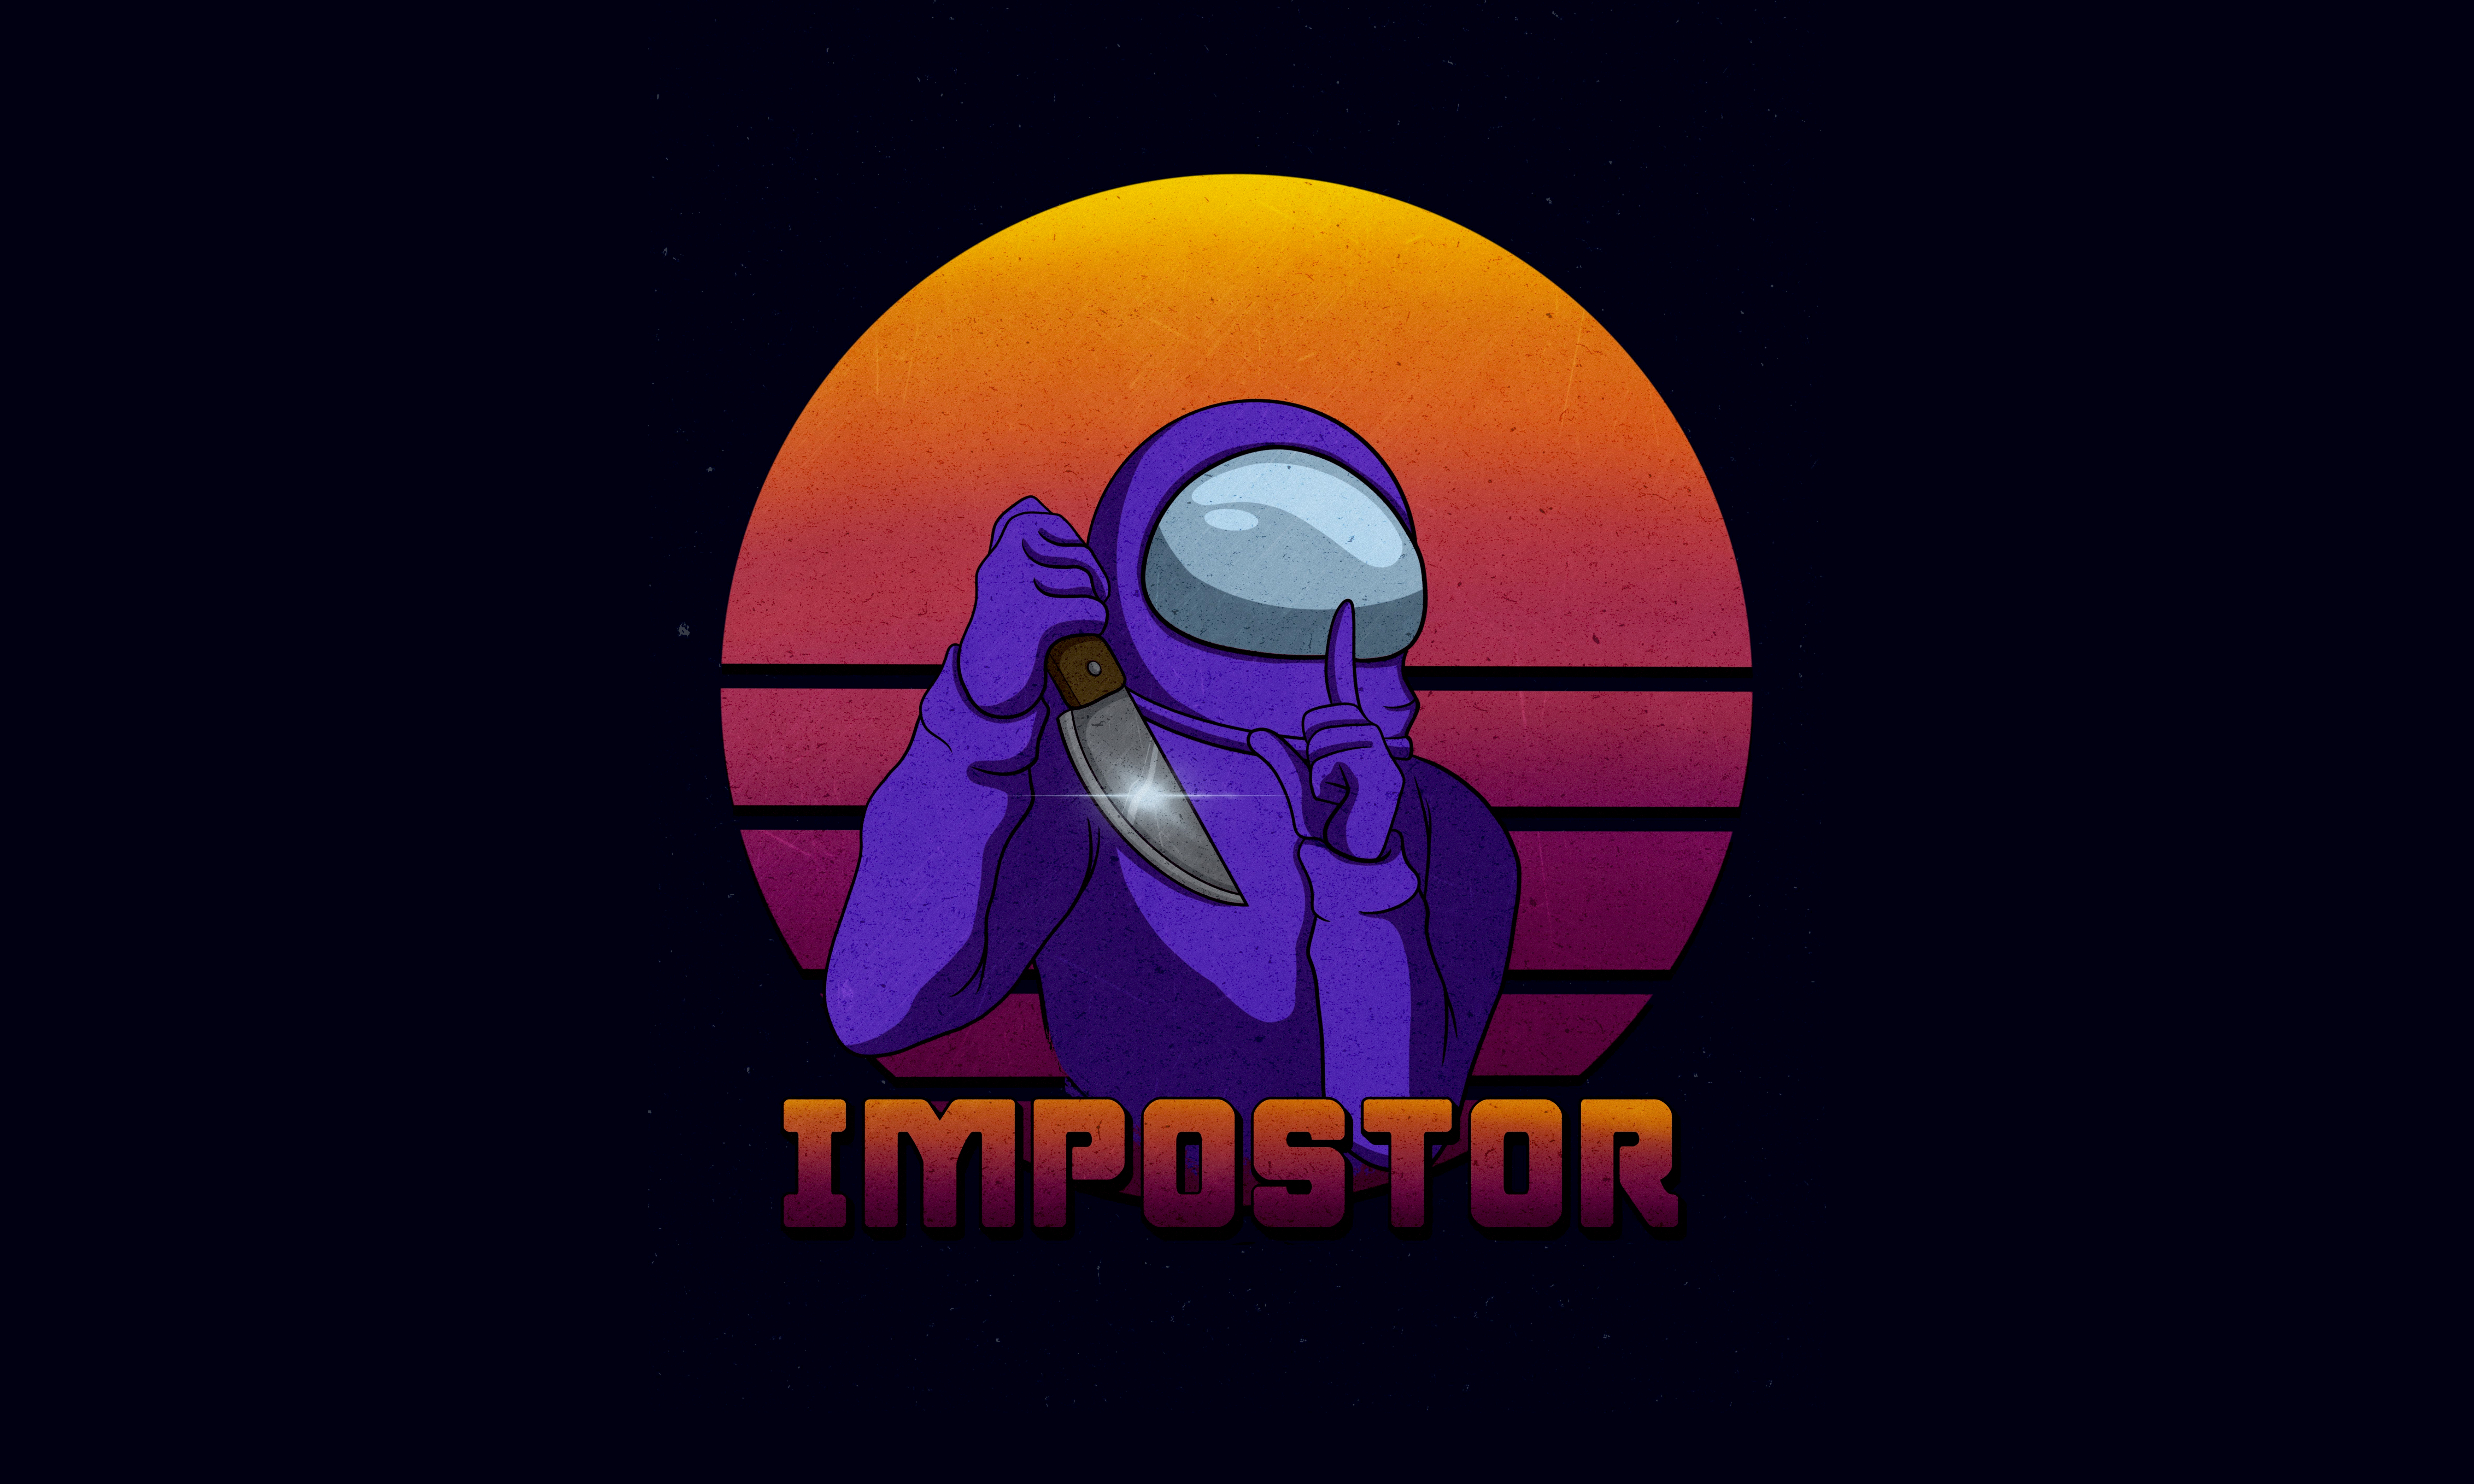 Impostor 4k Wallpaper Among Us Ios Games Android Games Pc Games Black Background 5k 8k Games 3968